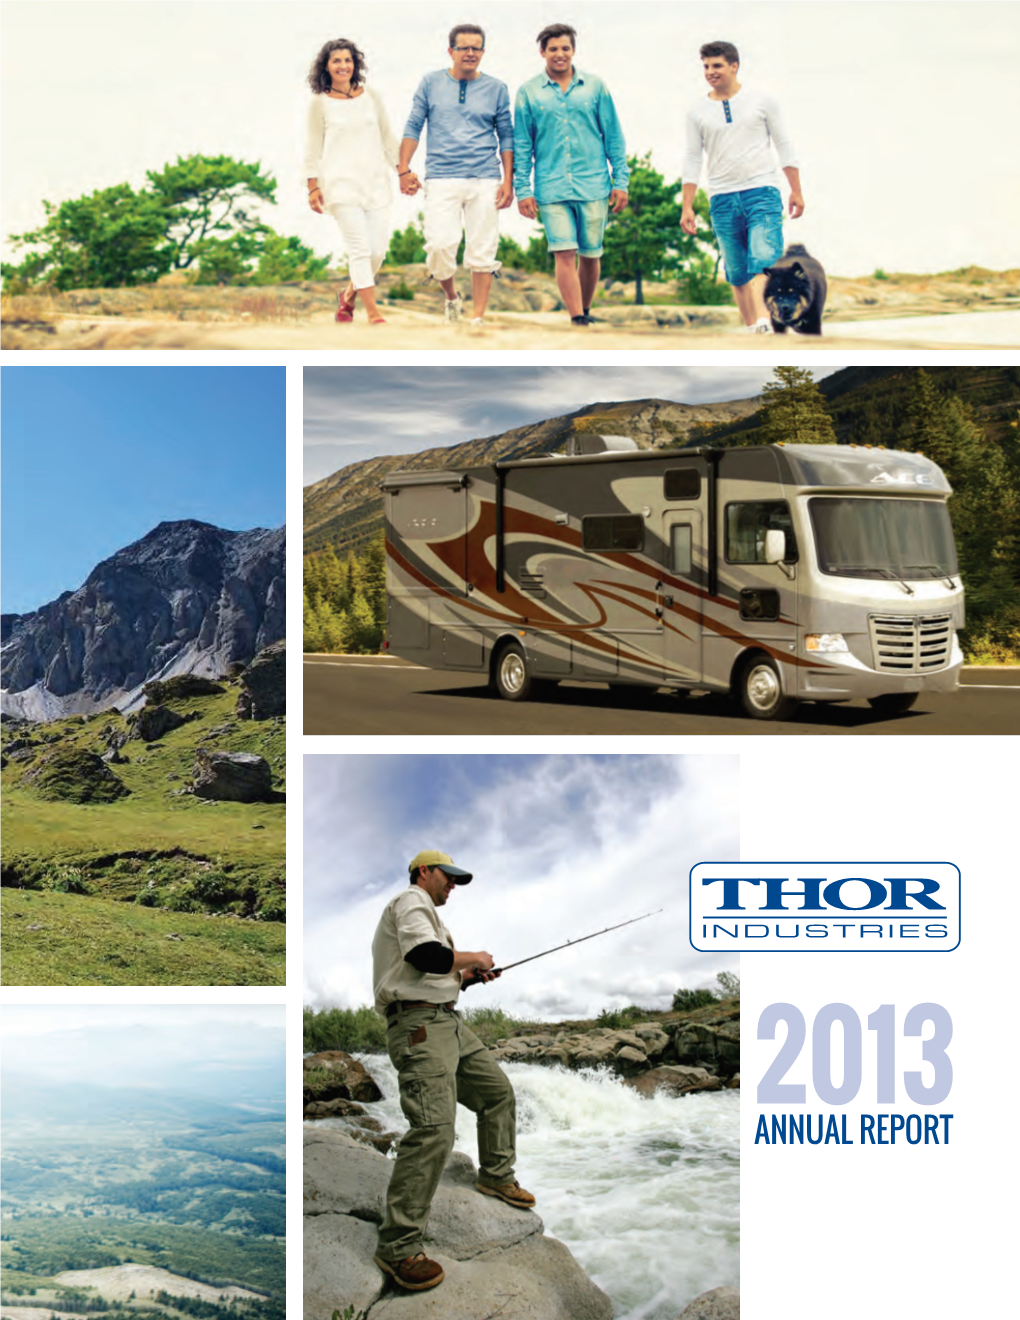 ANNUAL REPORT Airstream Manufactures and Sells Premium Quality Travel Trailers and Motorhomes